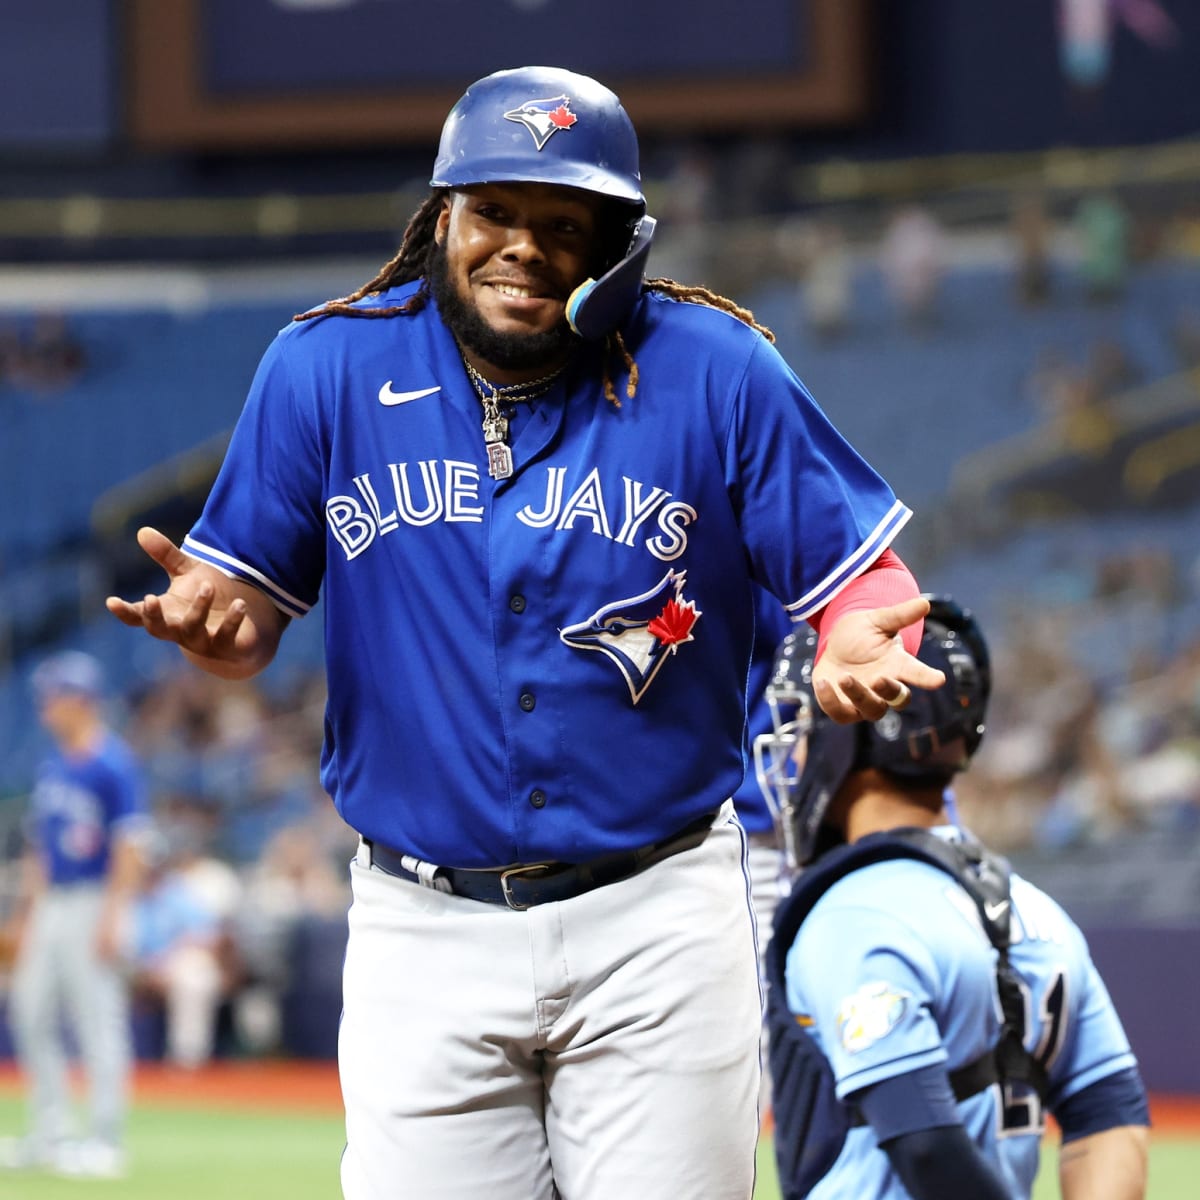 Vladimir Guerrero Jr Balled Out At The All-Star Game Last Night